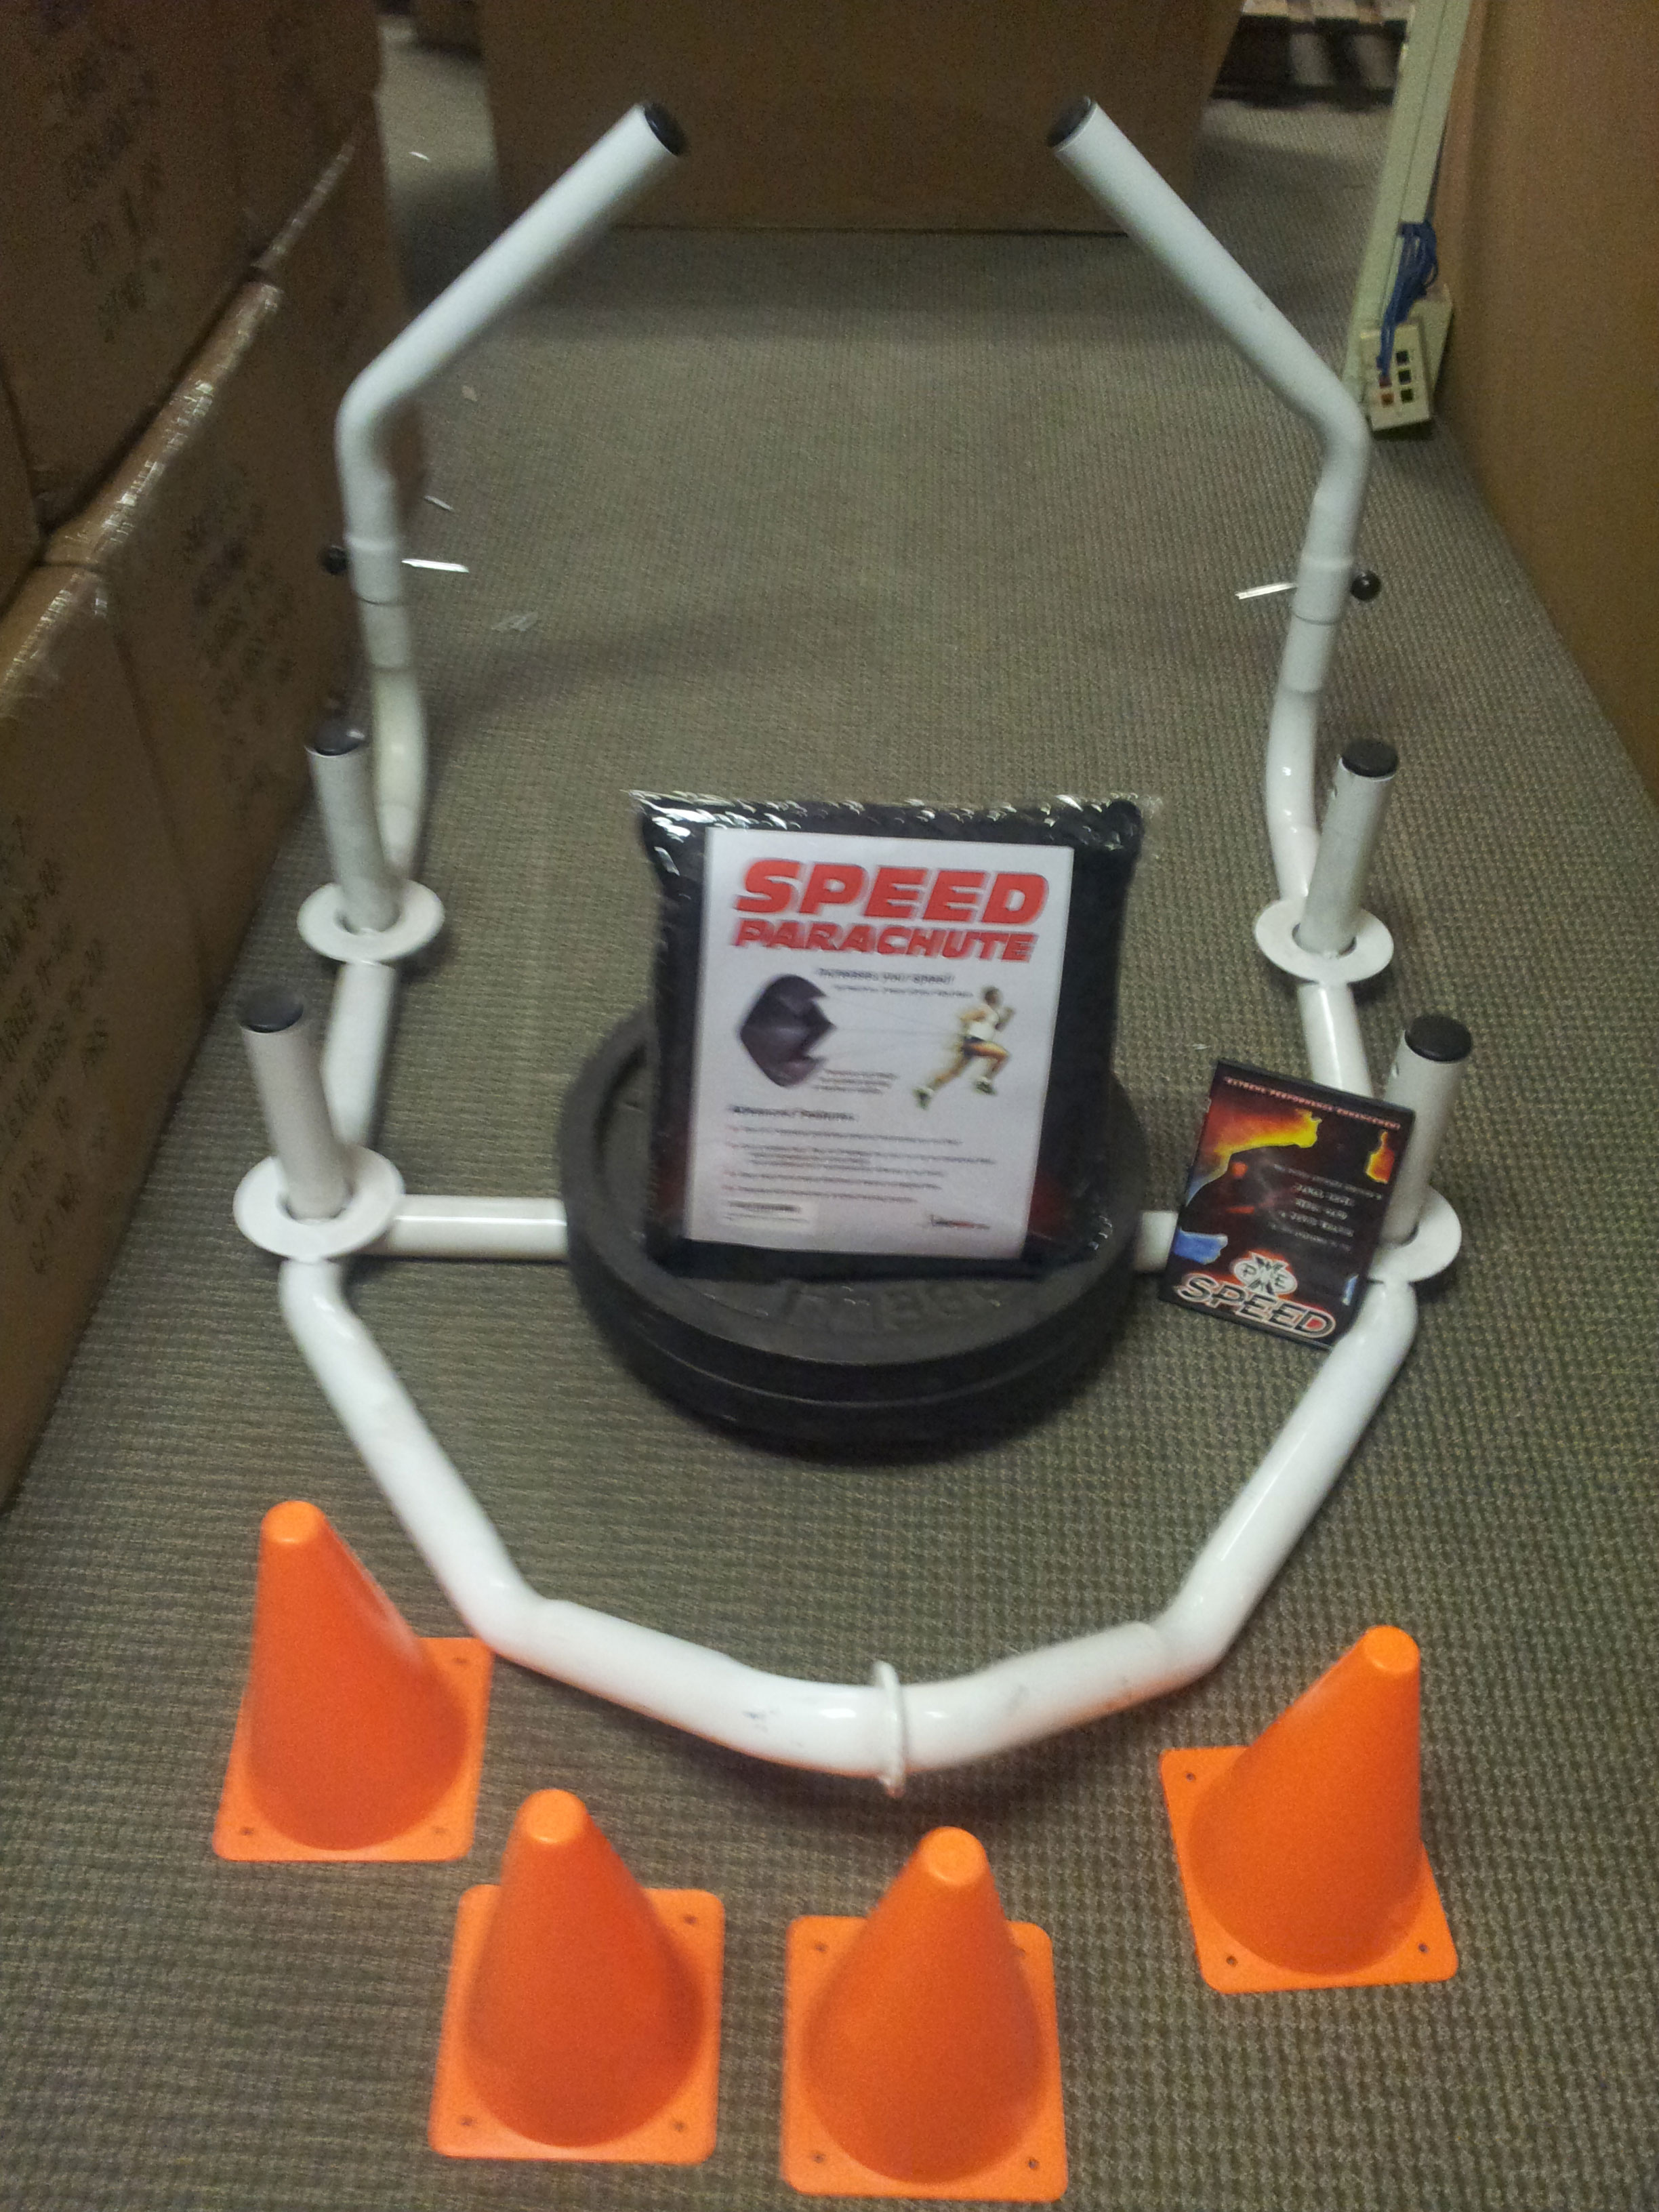 Drag Sled Pro Deluxe with Speed Parachute + NFL Speed DVD